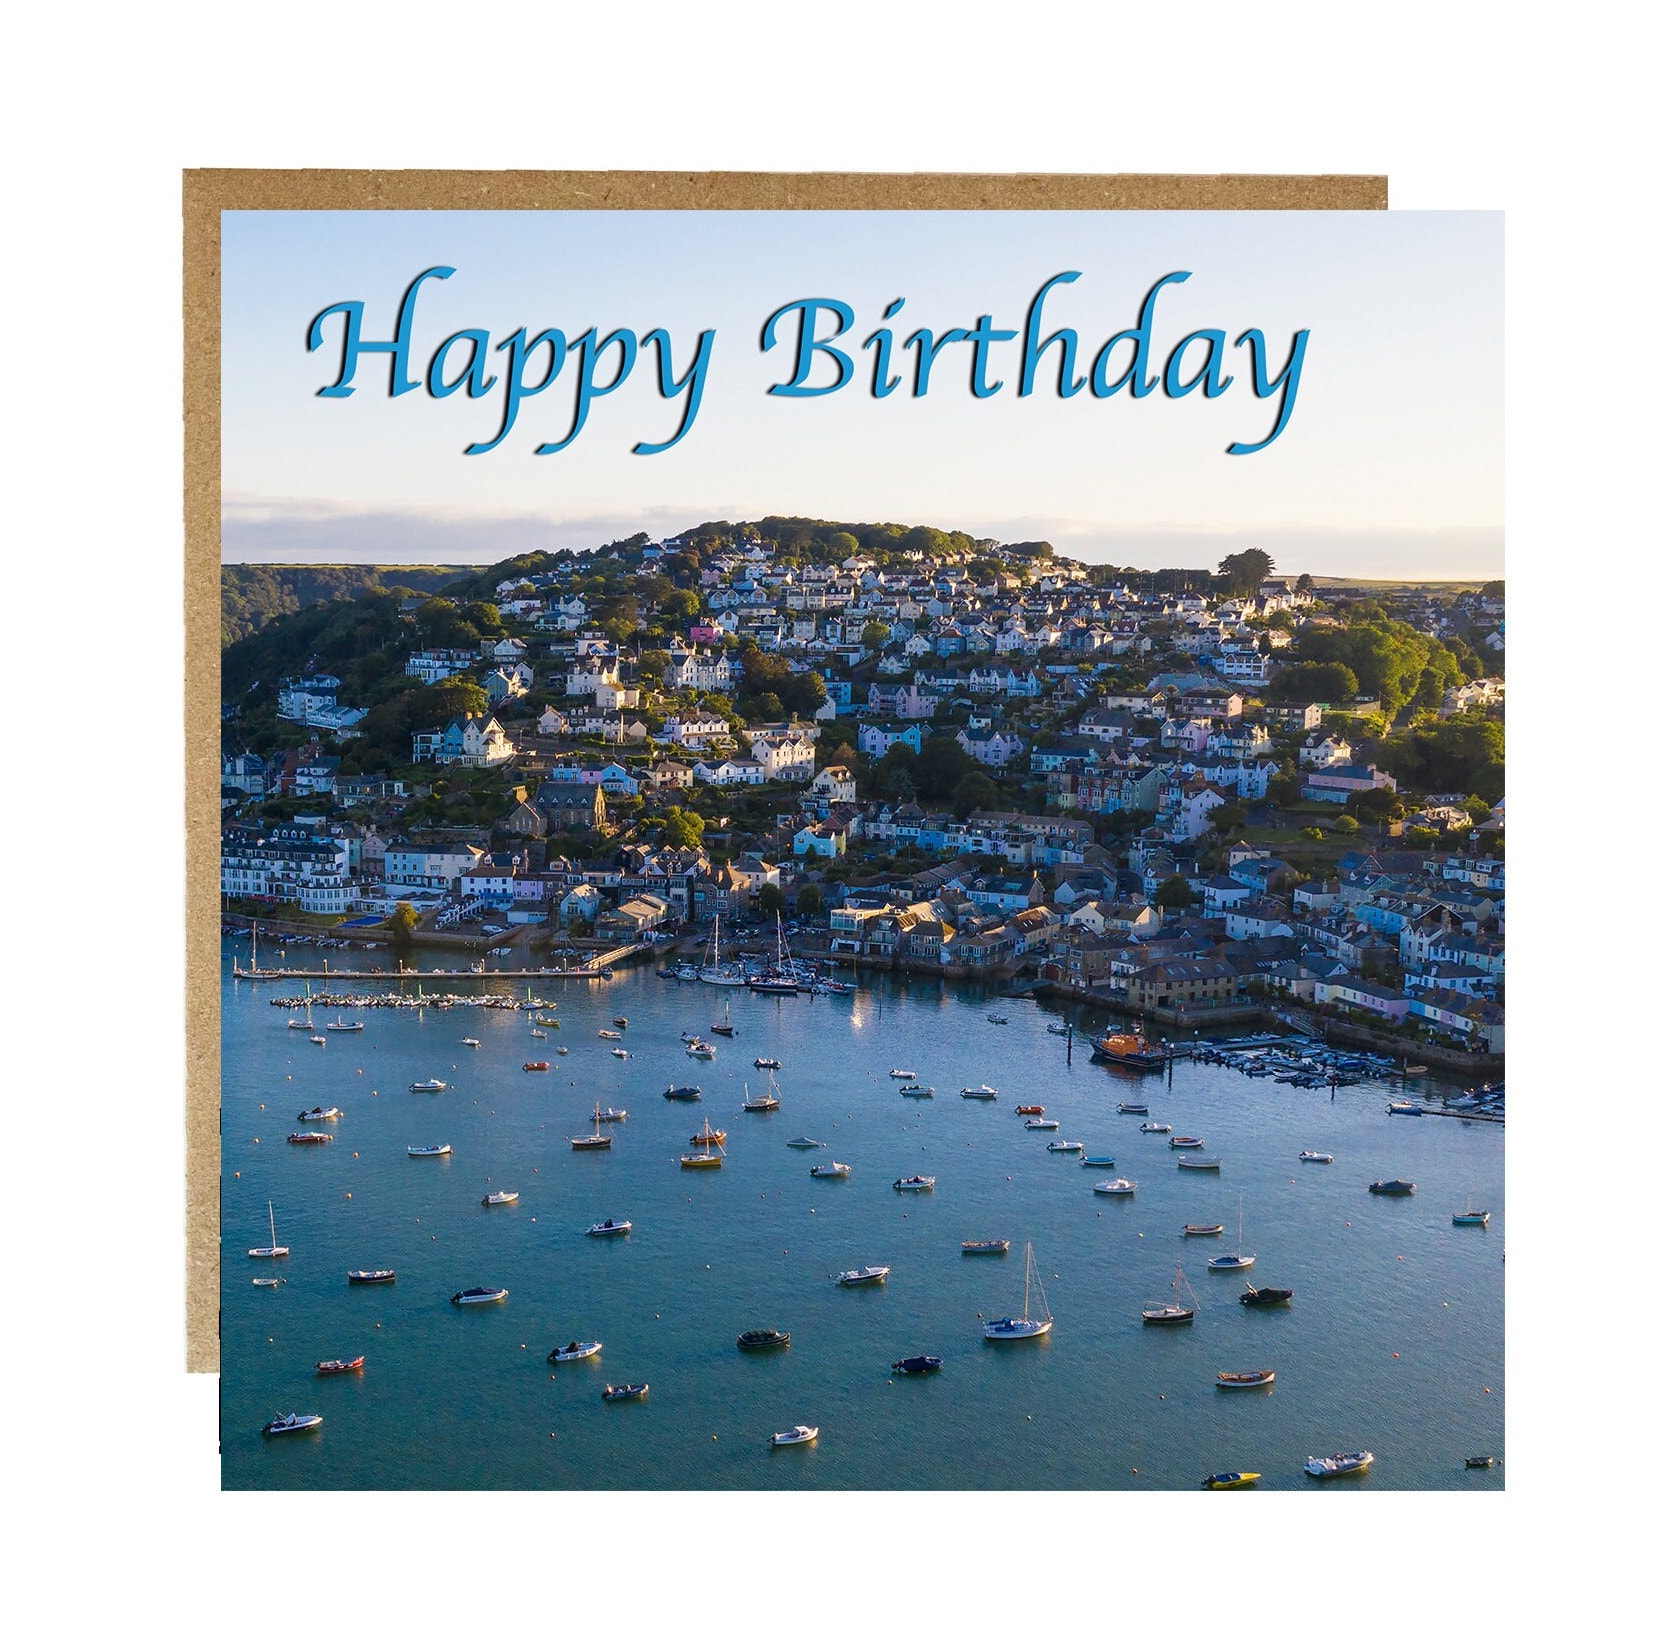 Happy Birthday greeting card with salcombe harbour photograph Salcombe card birthday card salcombe birthday card mens birthday card